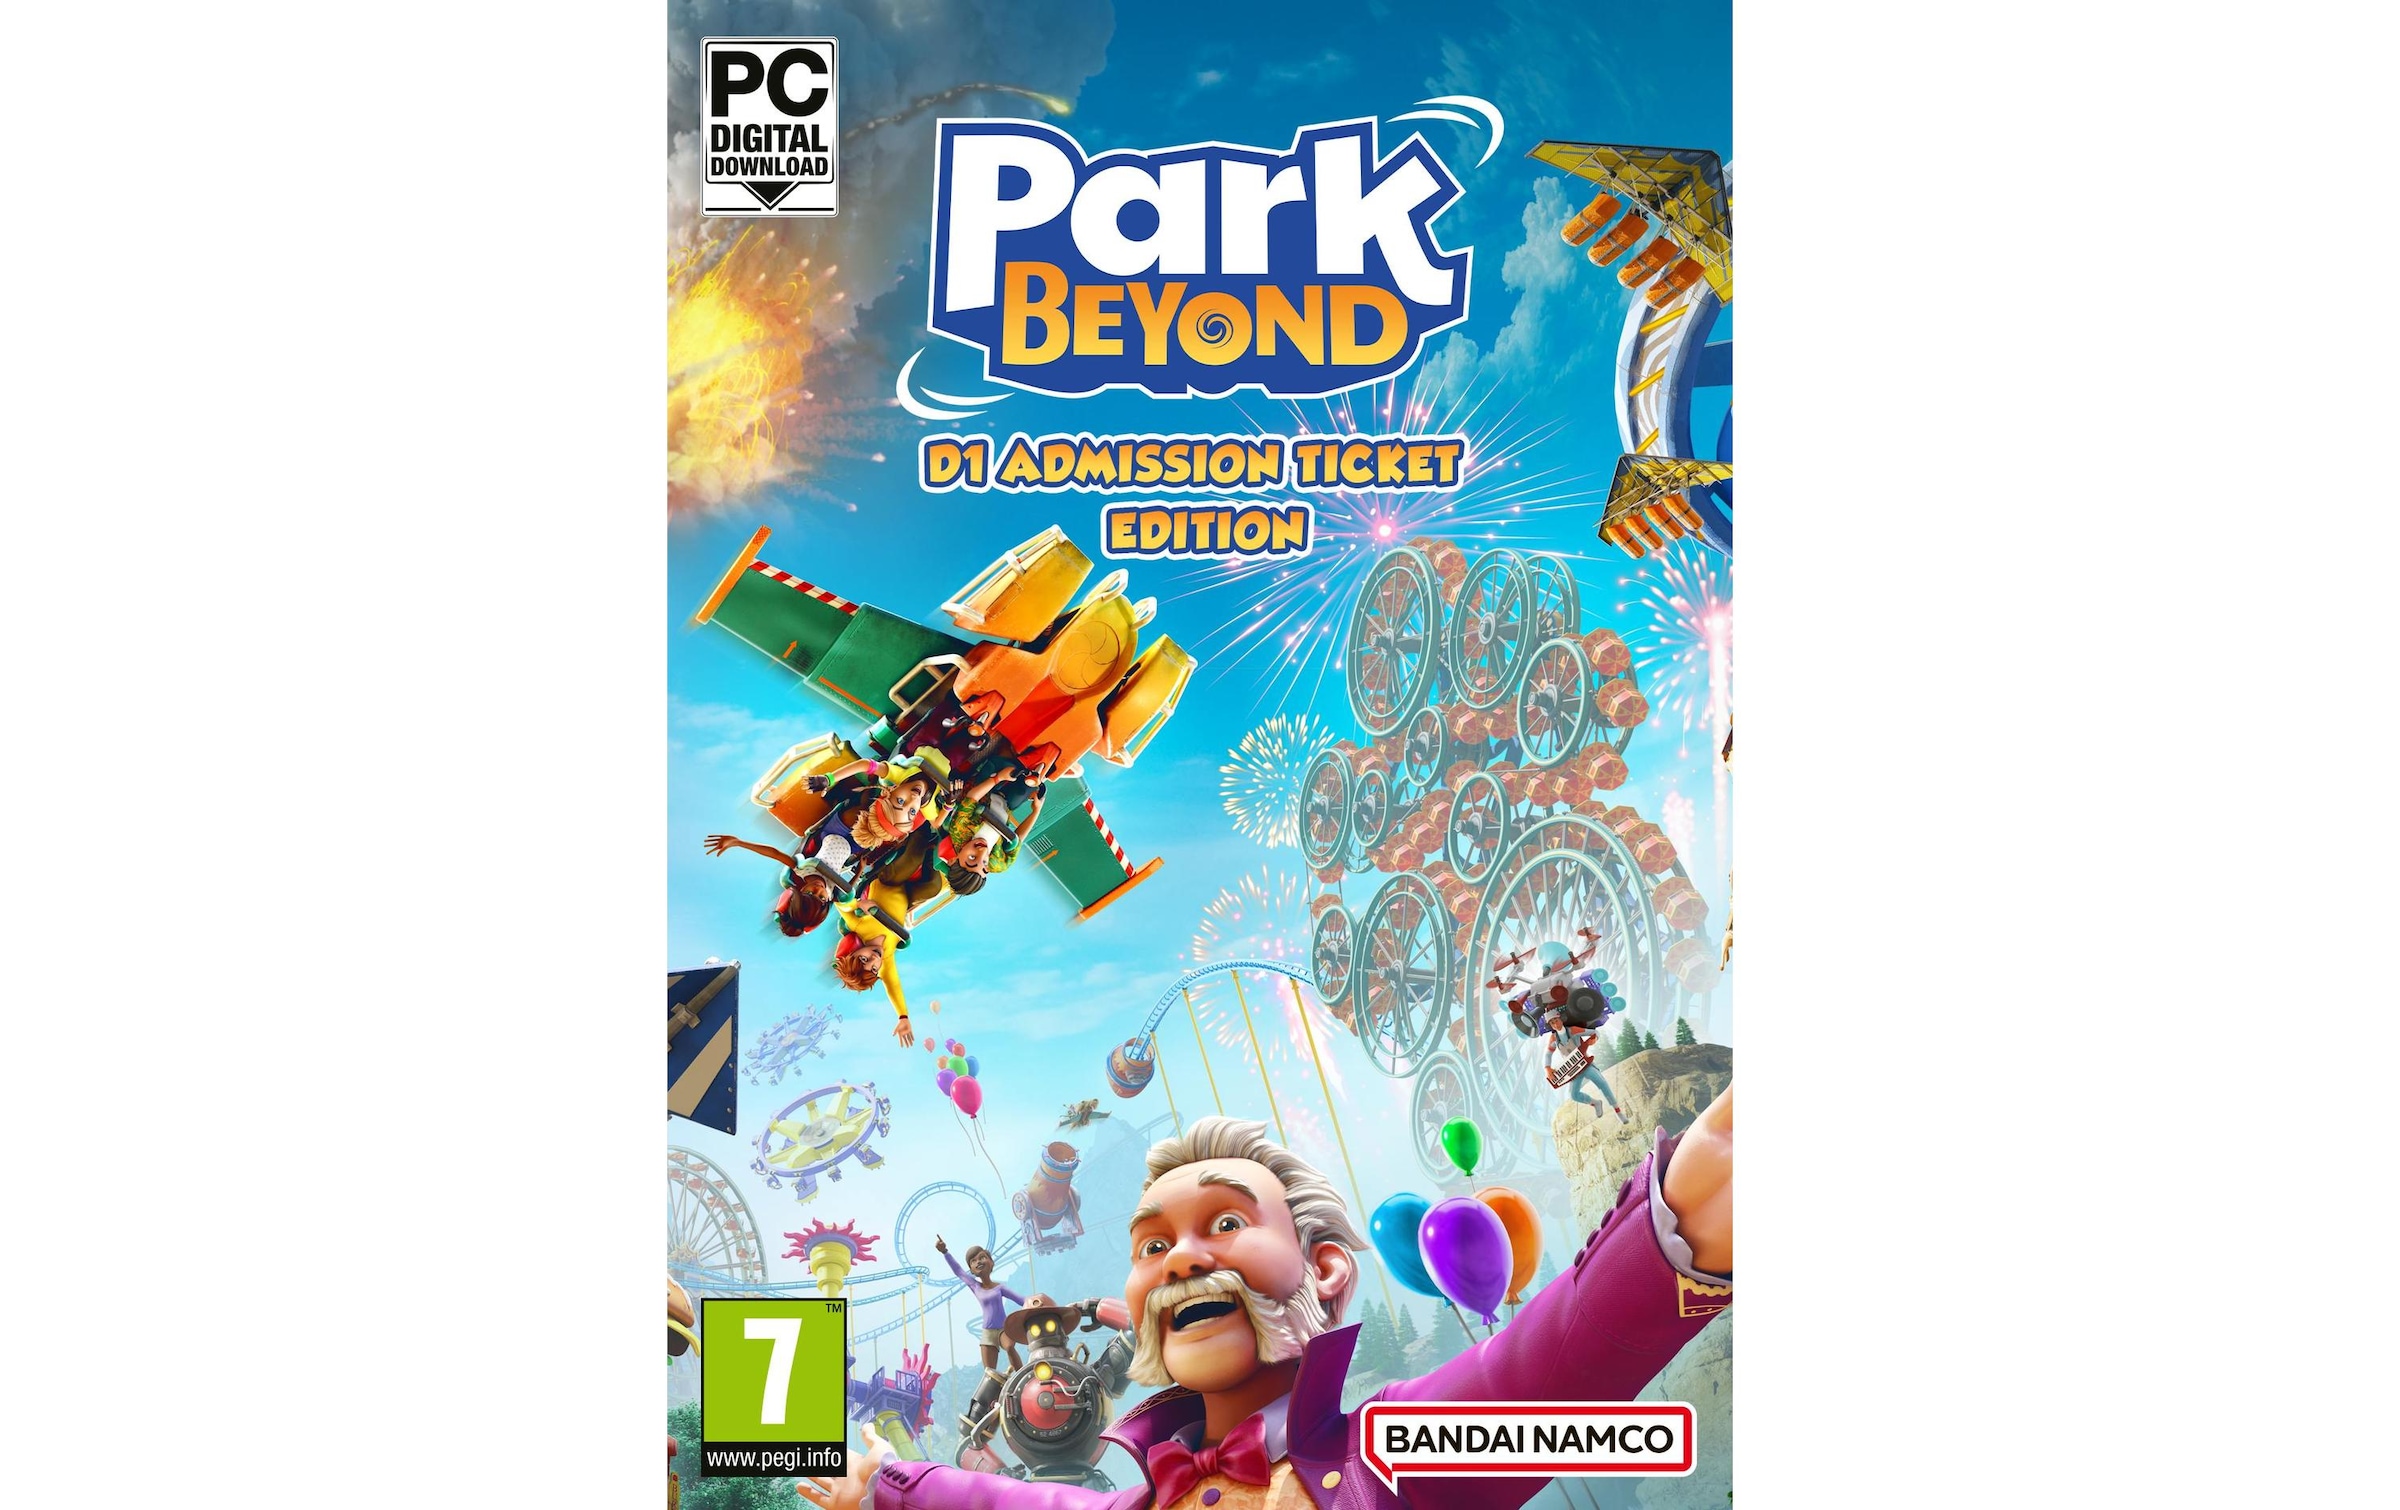 BANDAI NAMCO Spielesoftware »Park Beyond Day 1 Ad«, PC